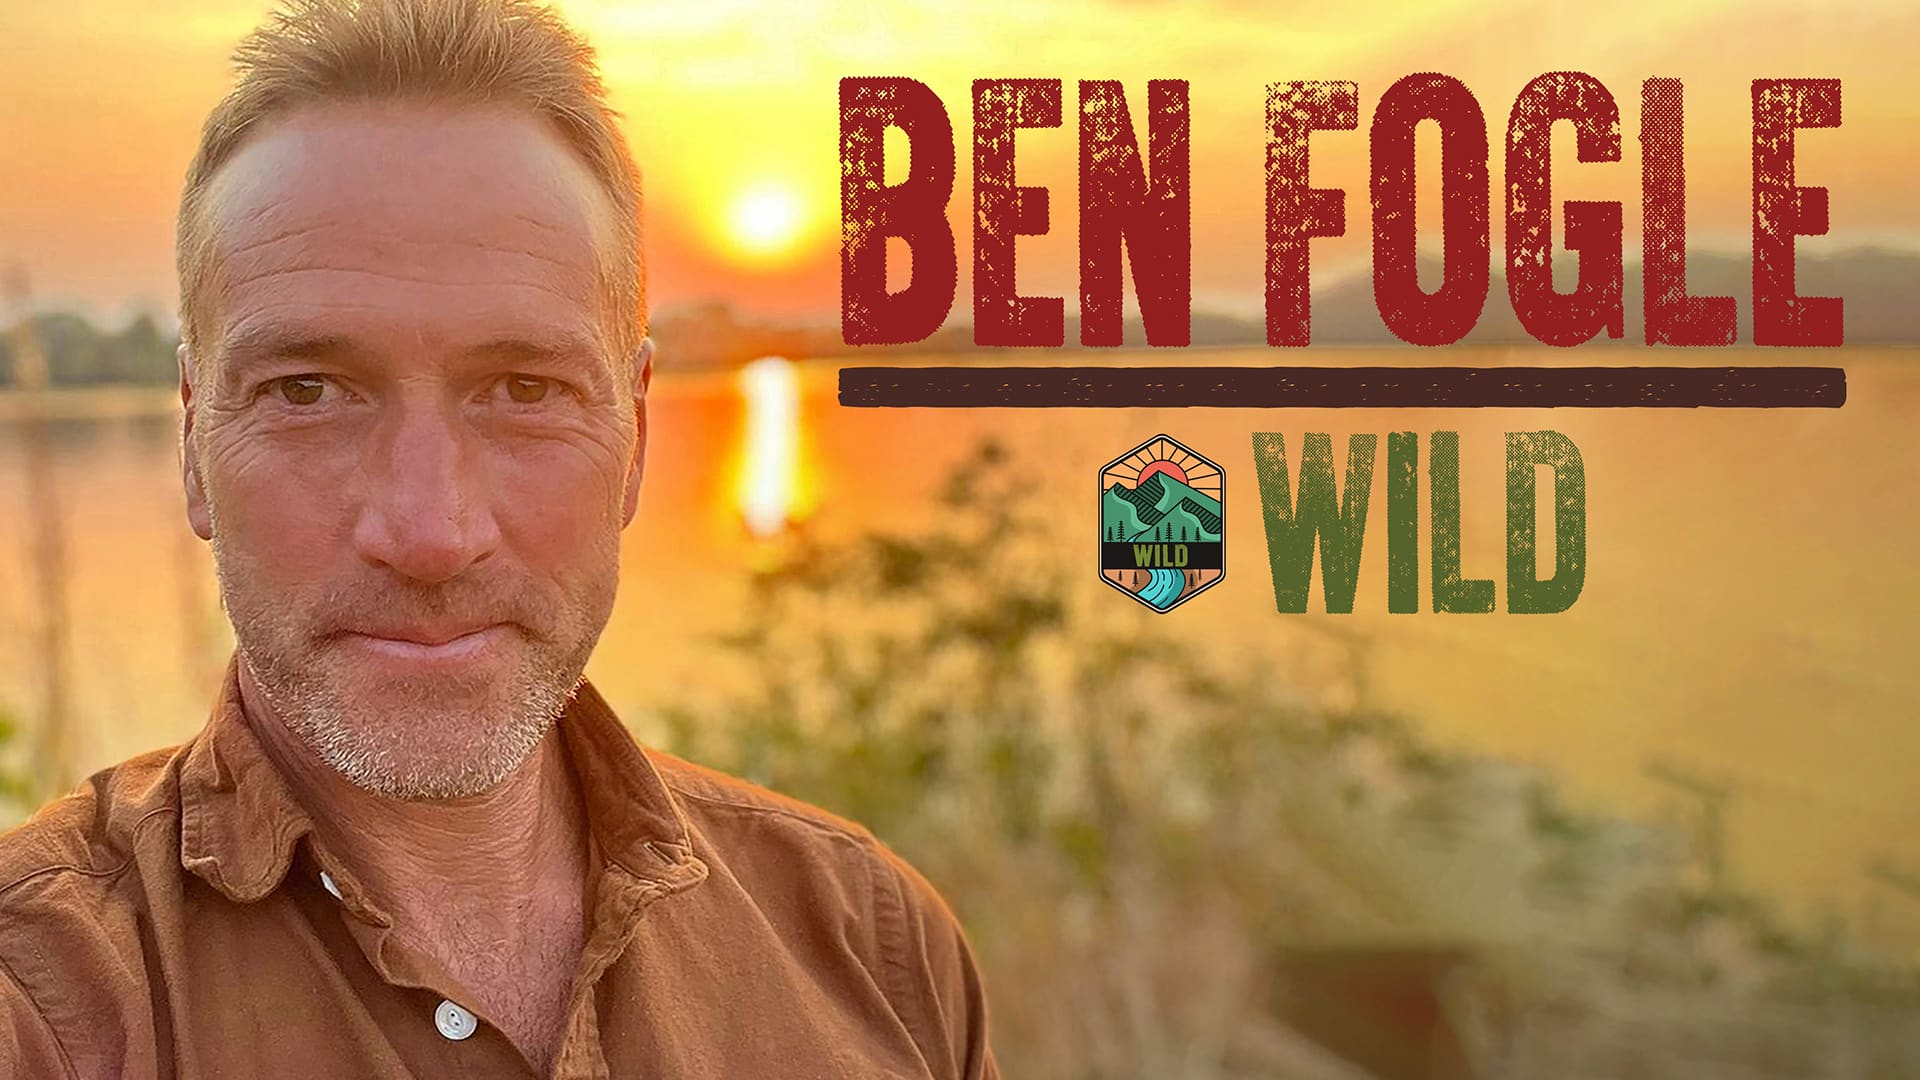 Ben Fogle: Wild artwork. (Left) Ben Fogle, a middle-aged white man with grey stubble wearing a brown shirt, smiles while taking a selfie in front of a sunset over a lake. To their right, text reads: 'Ben Fogle. Wild.'